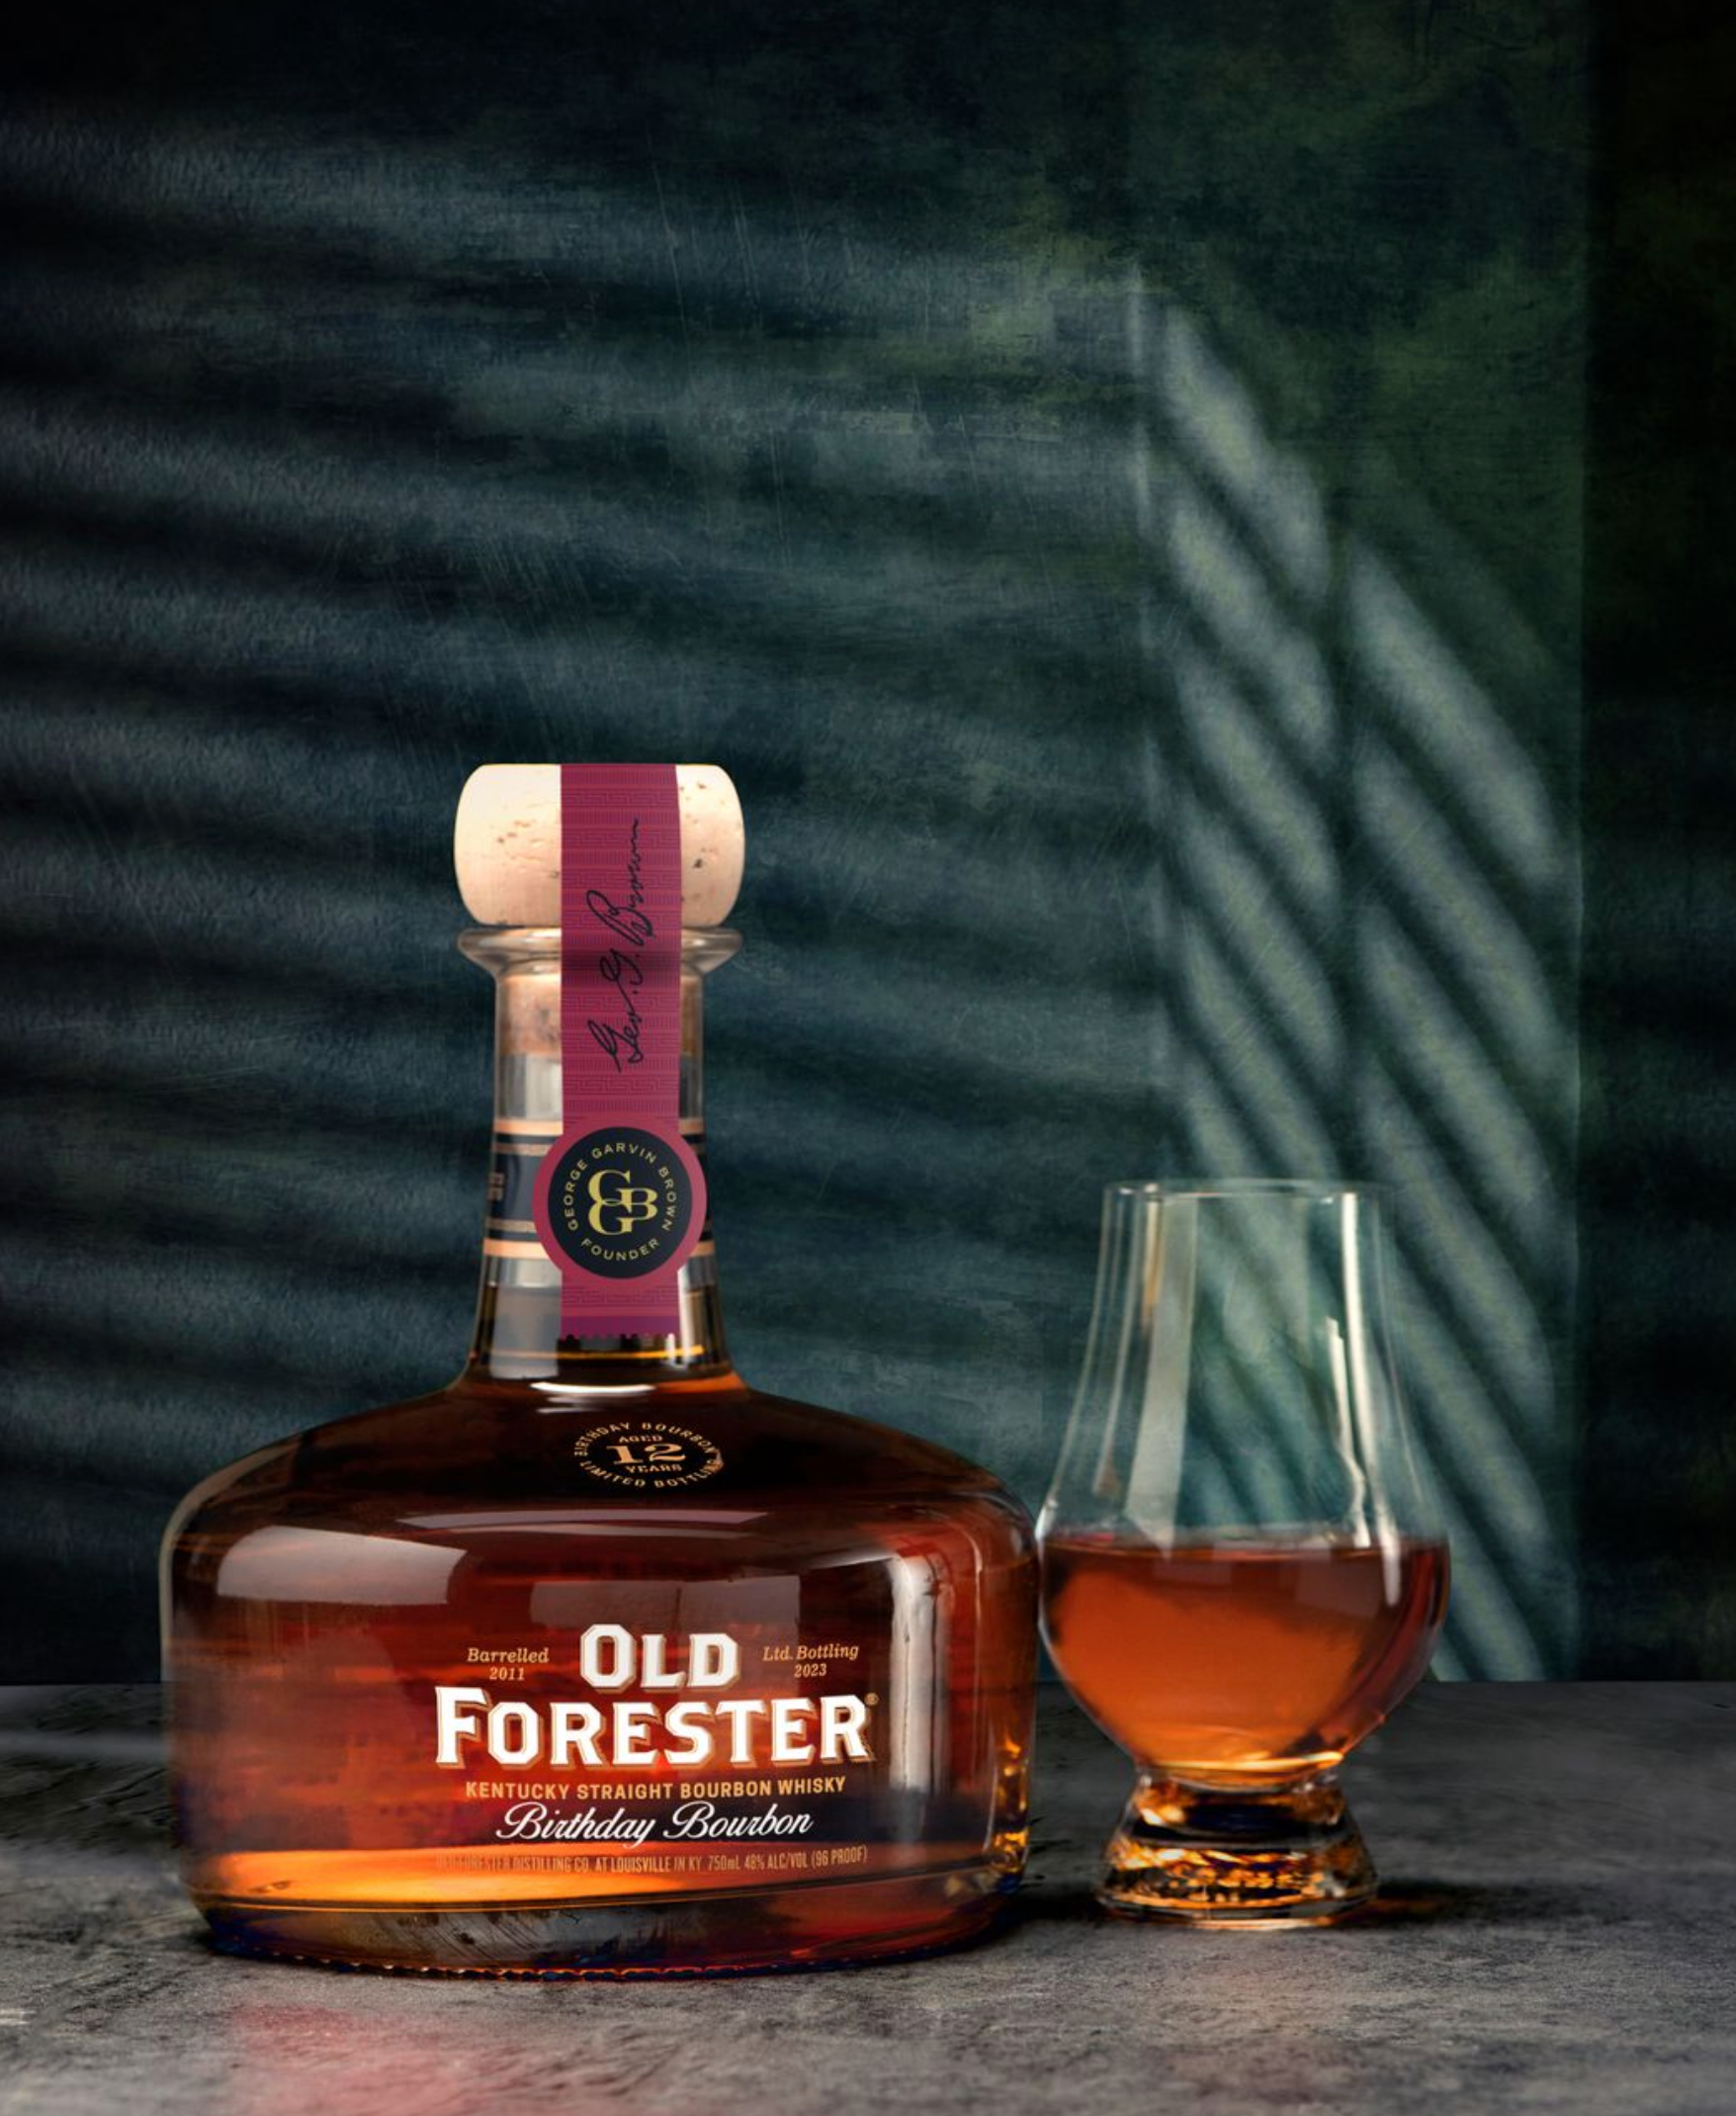 Old Forester Birthday Bourbon 2023 Release